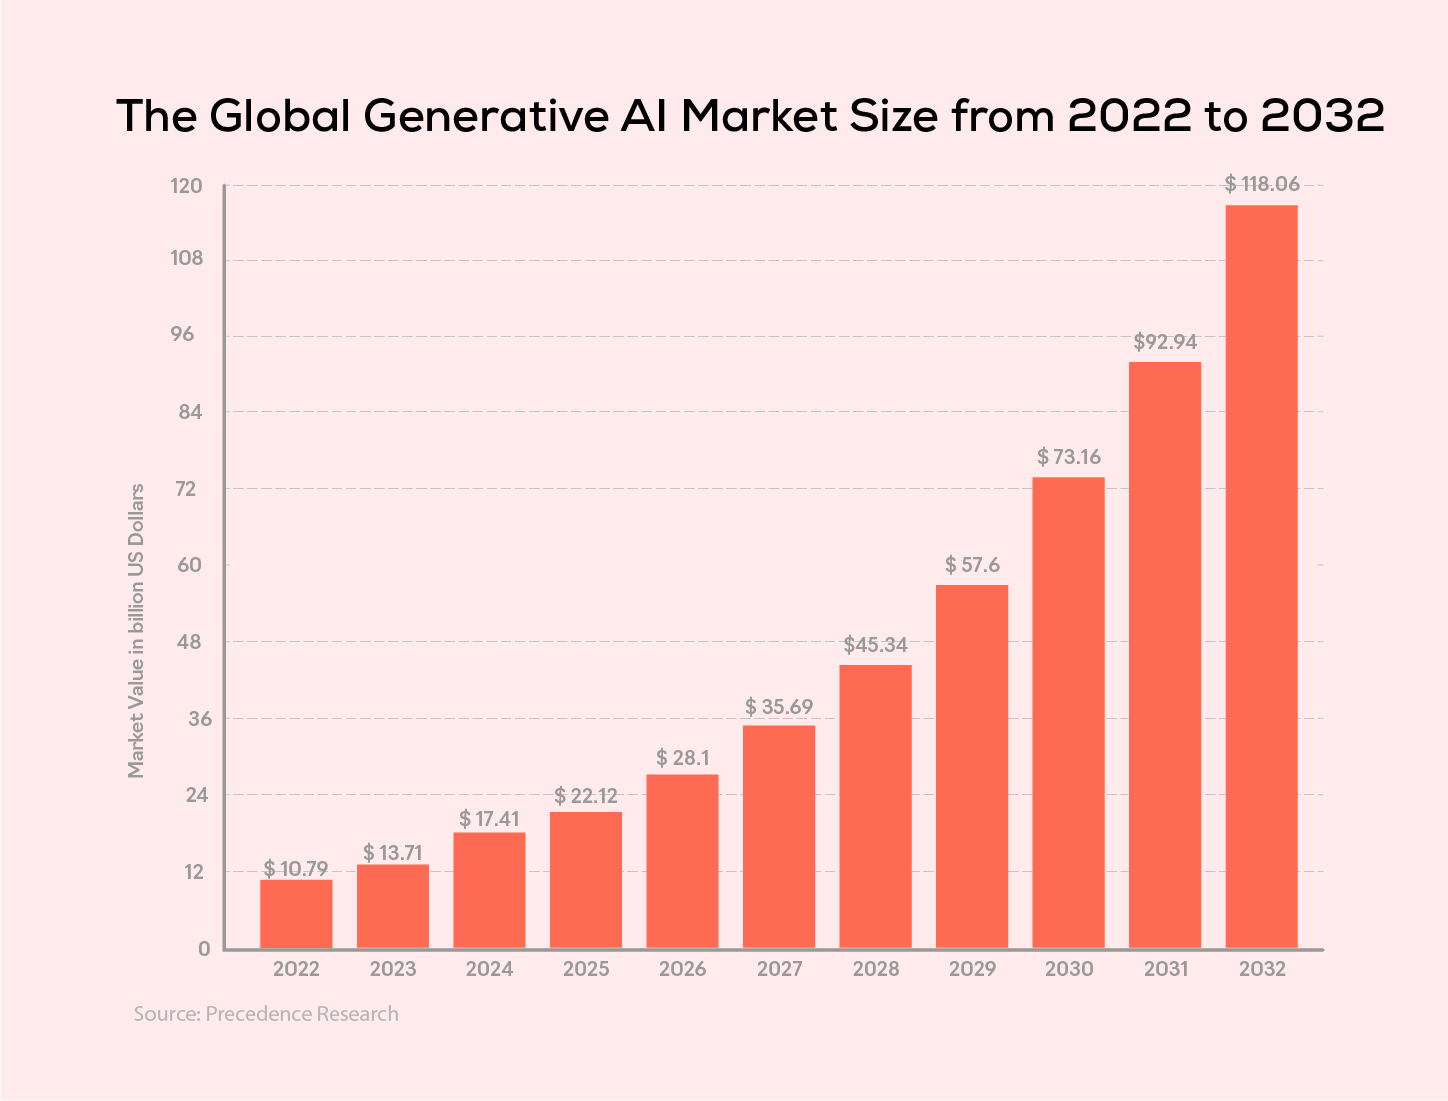 The Global Generative AI Market Size in 2032